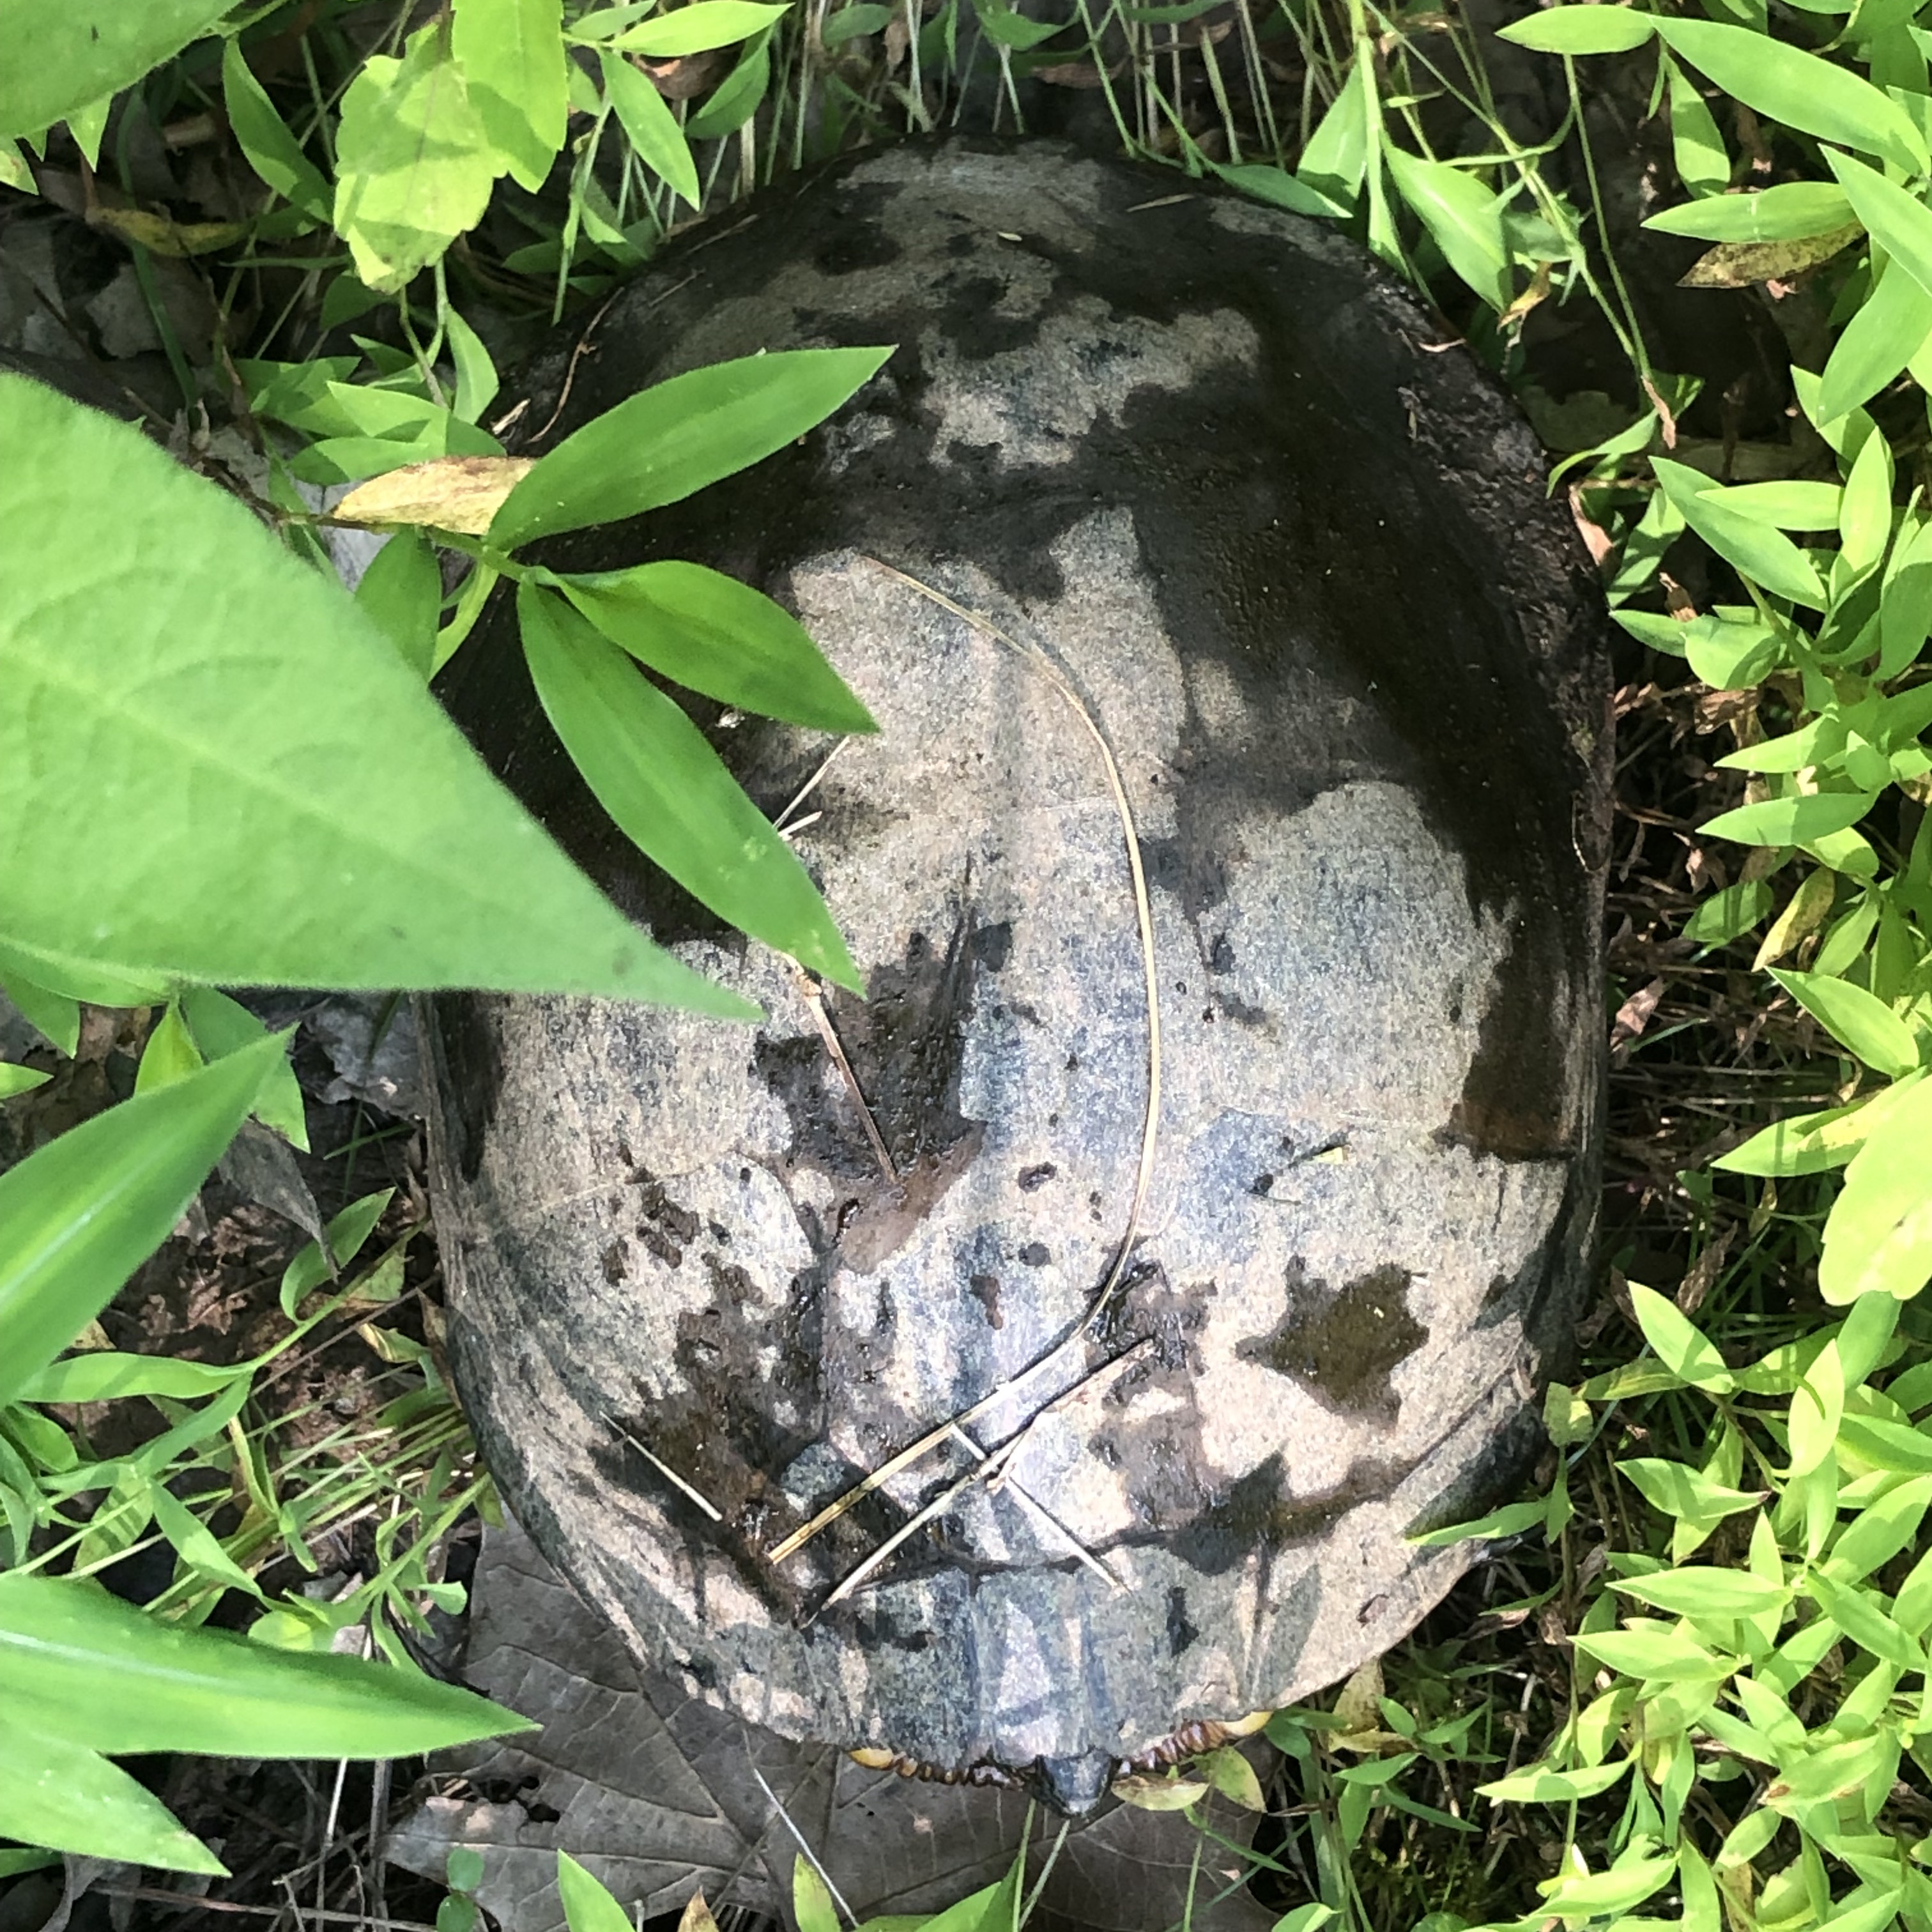 Common Snapping Turtle in Great Falls, VA